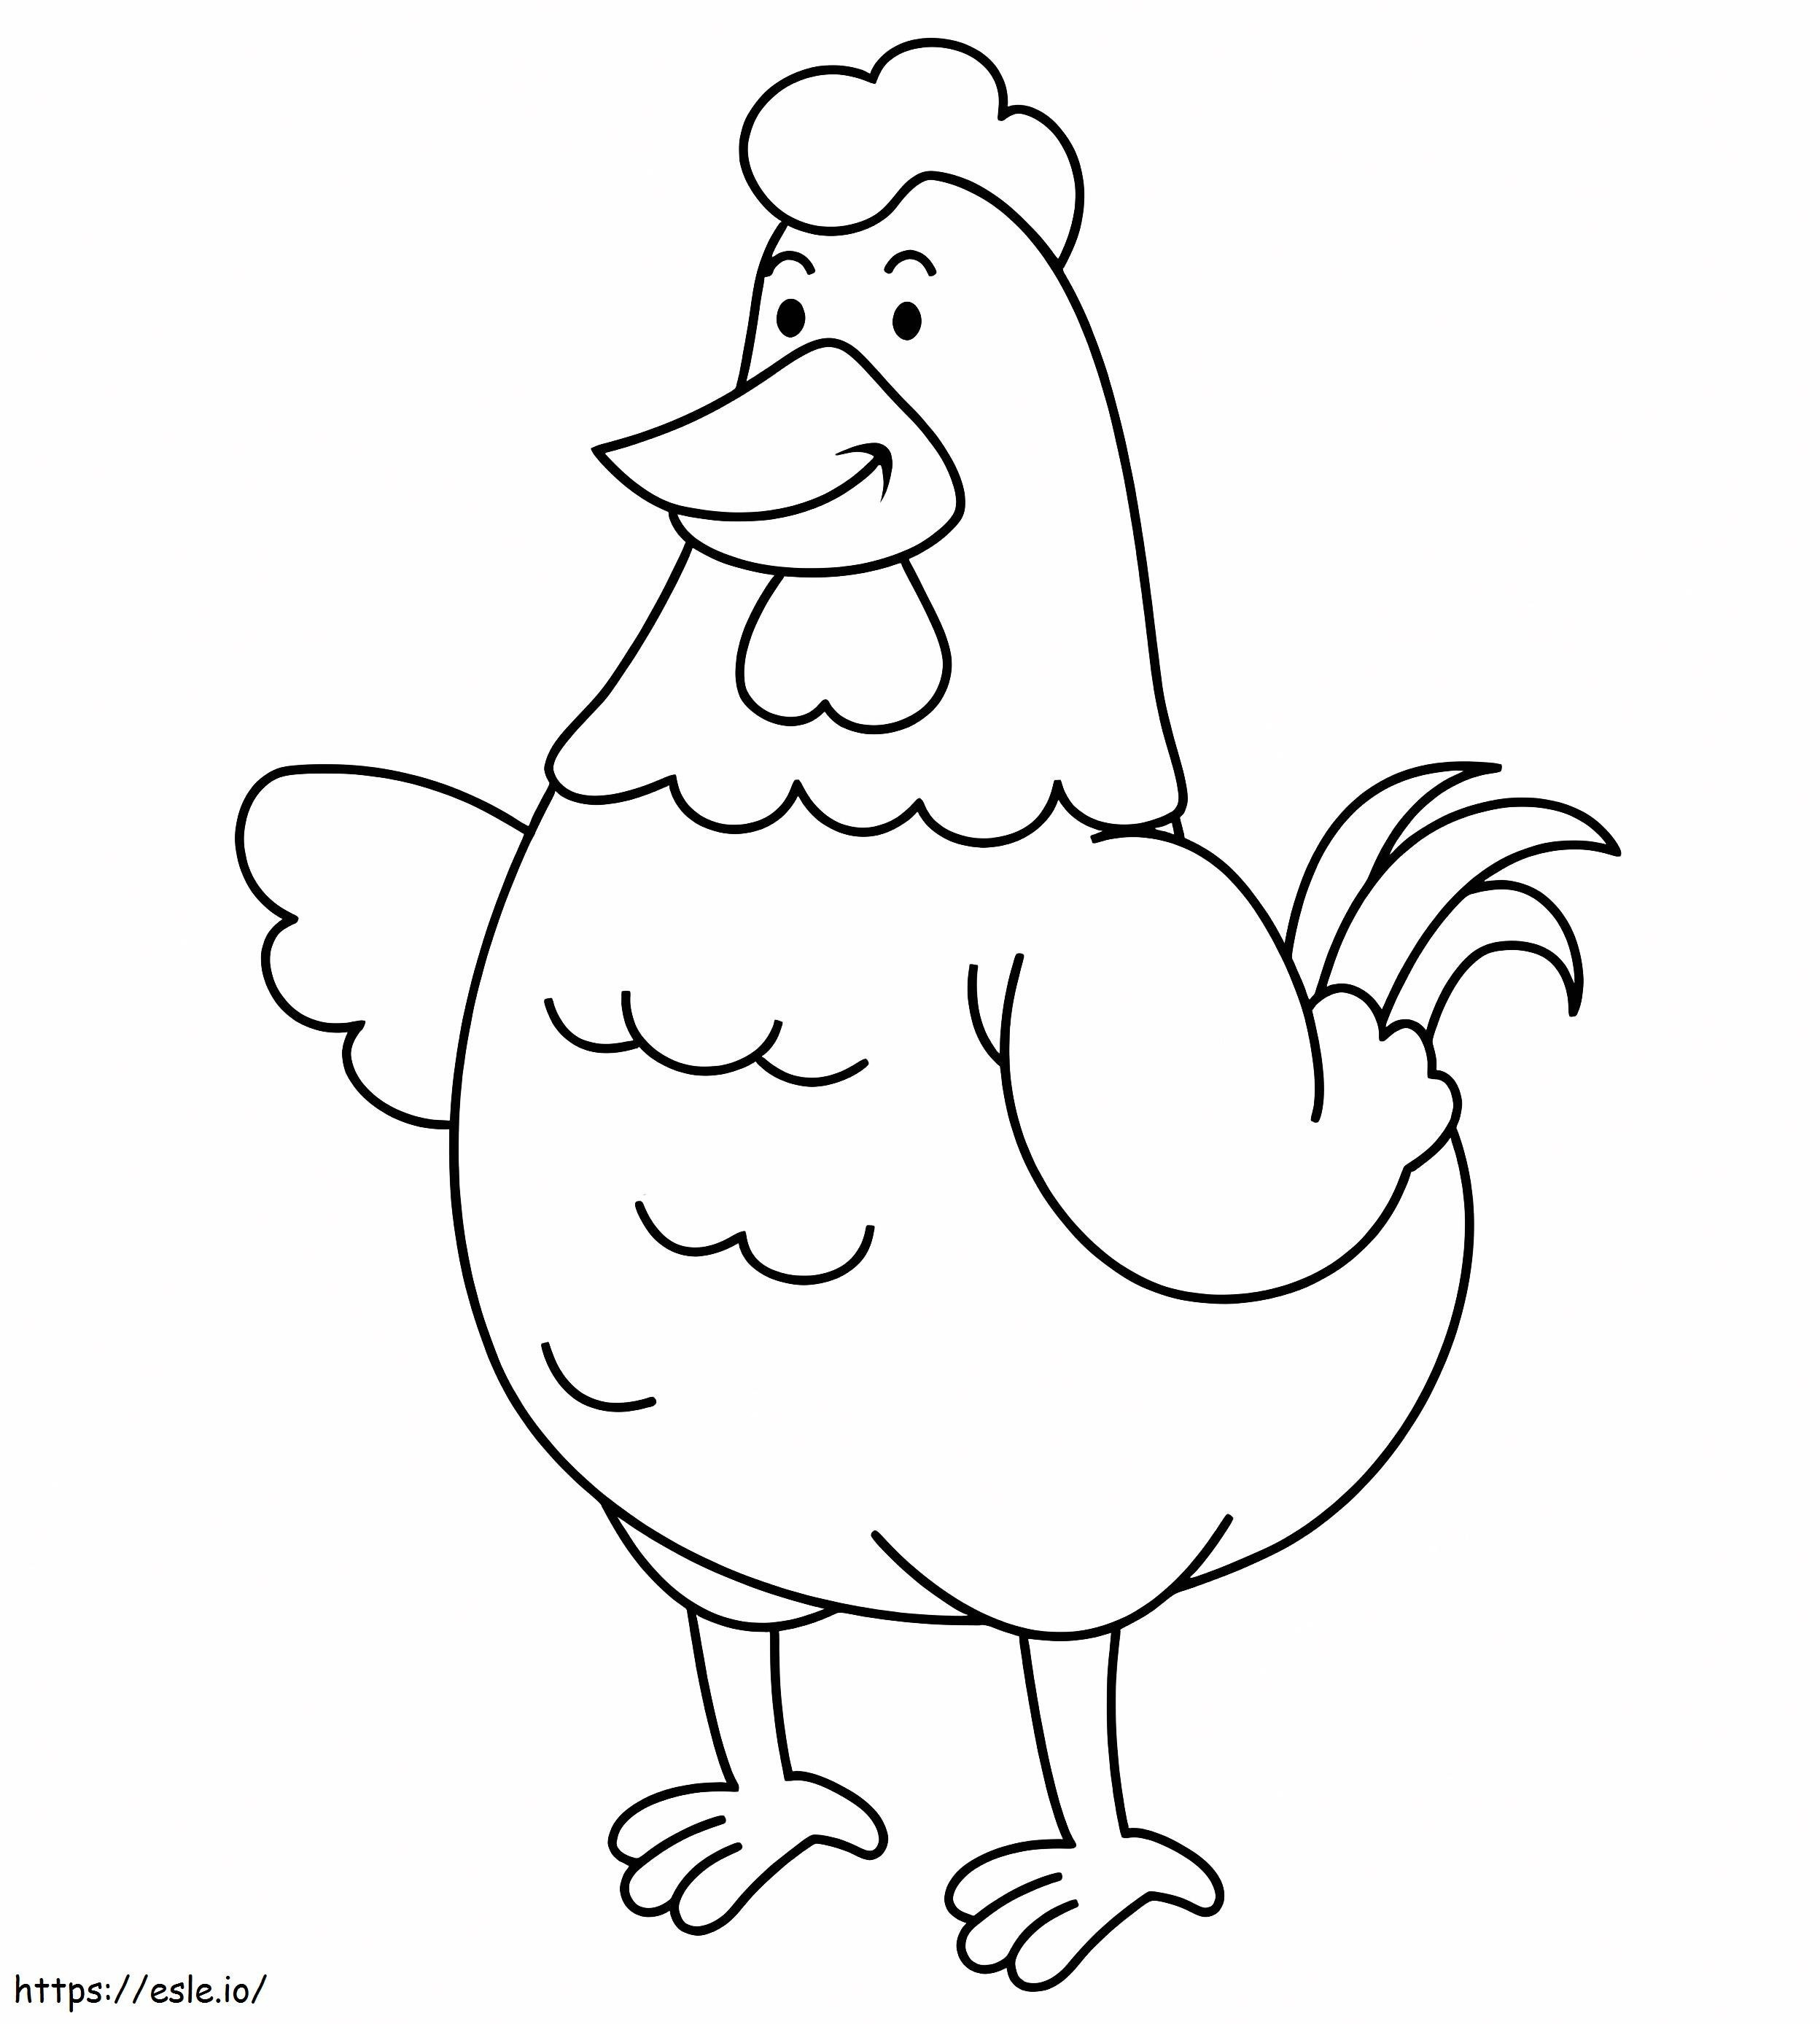 Chicken Smiling coloring page